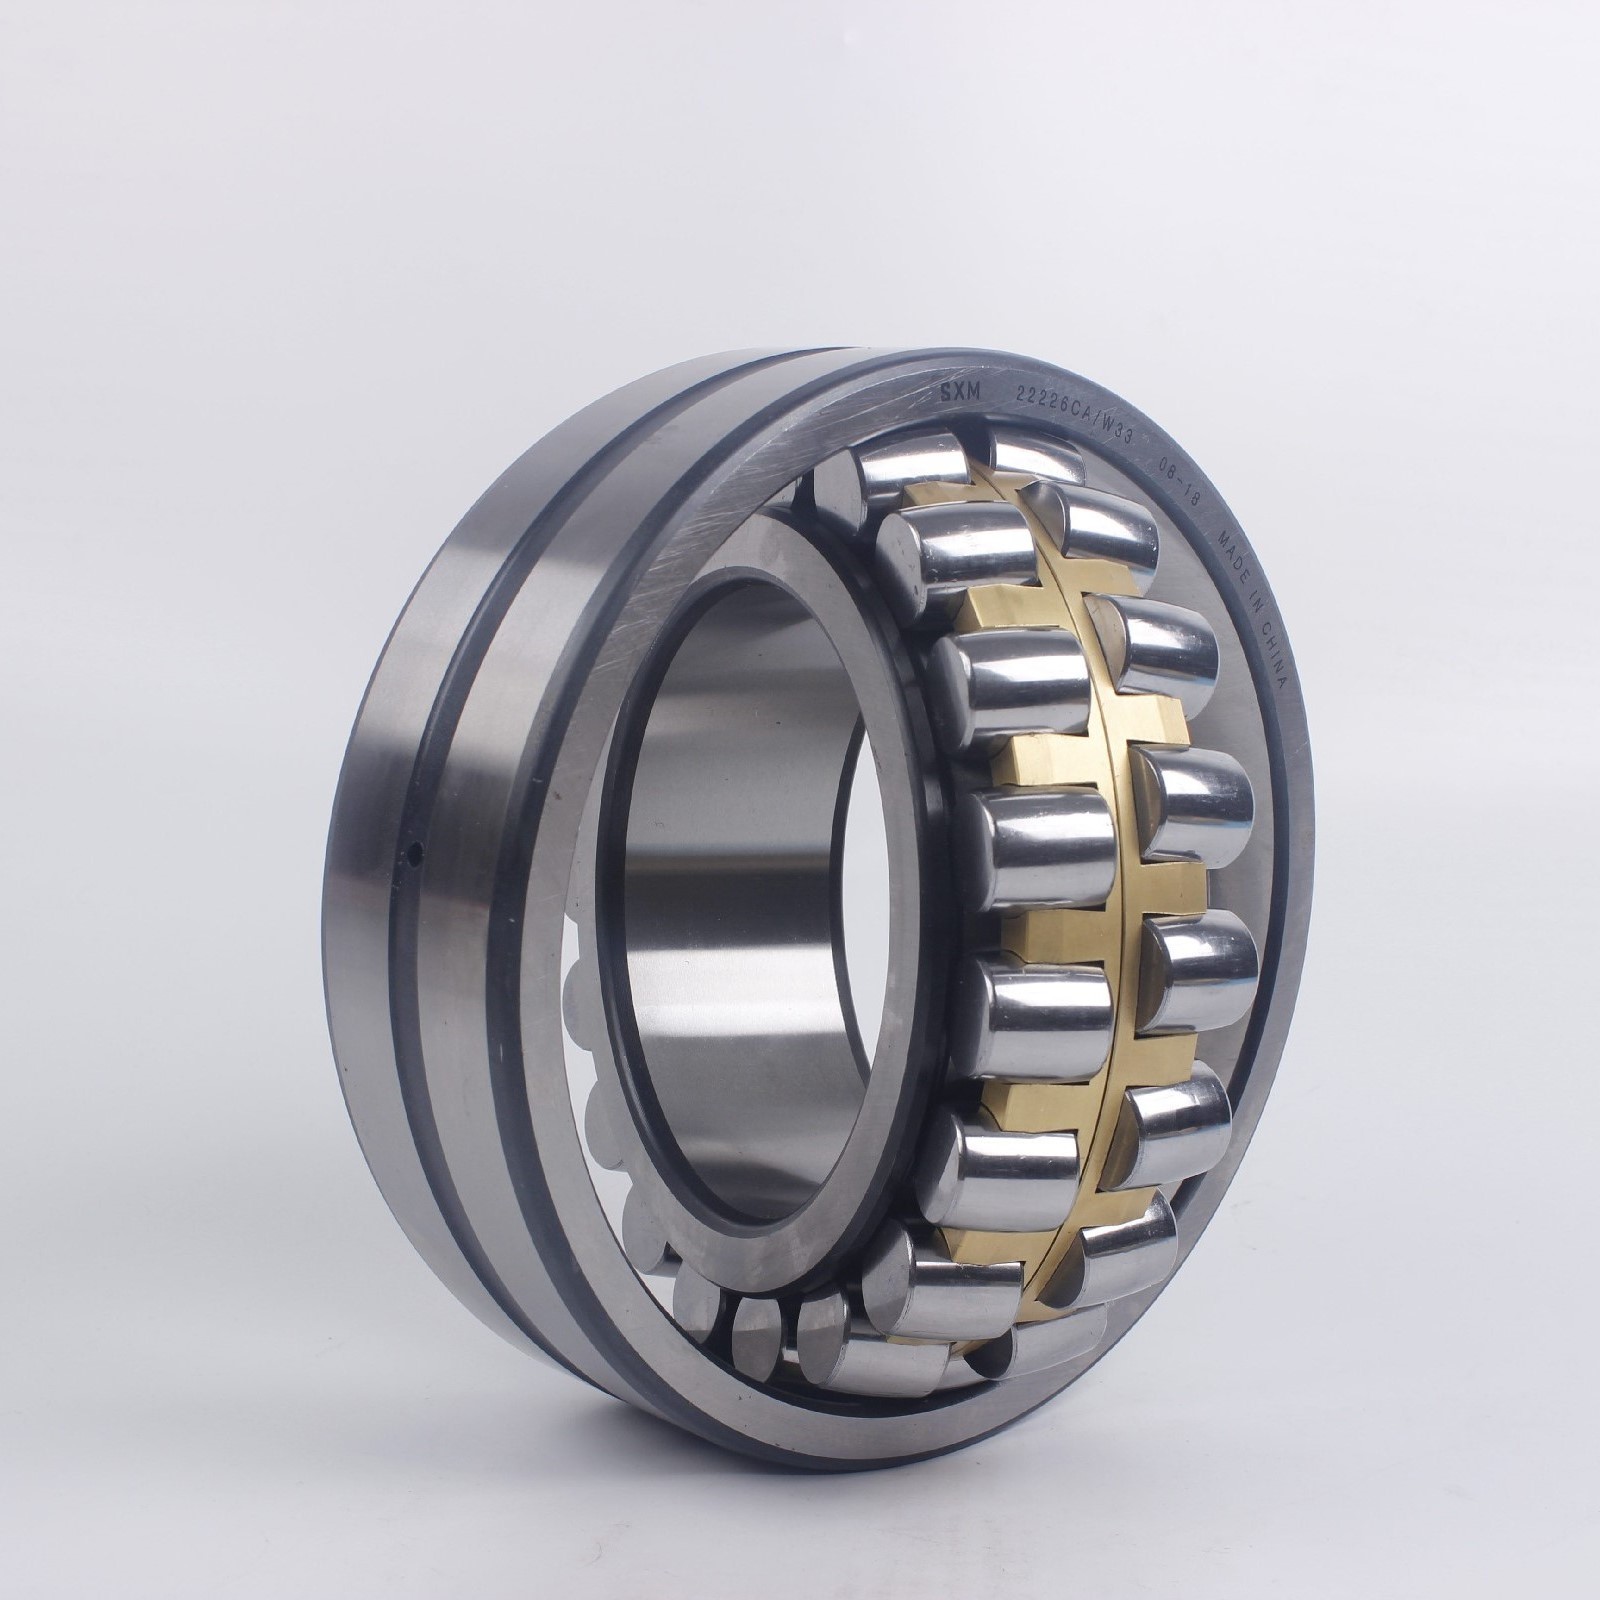 Industrial Bearing Accessories For Mining Machinery